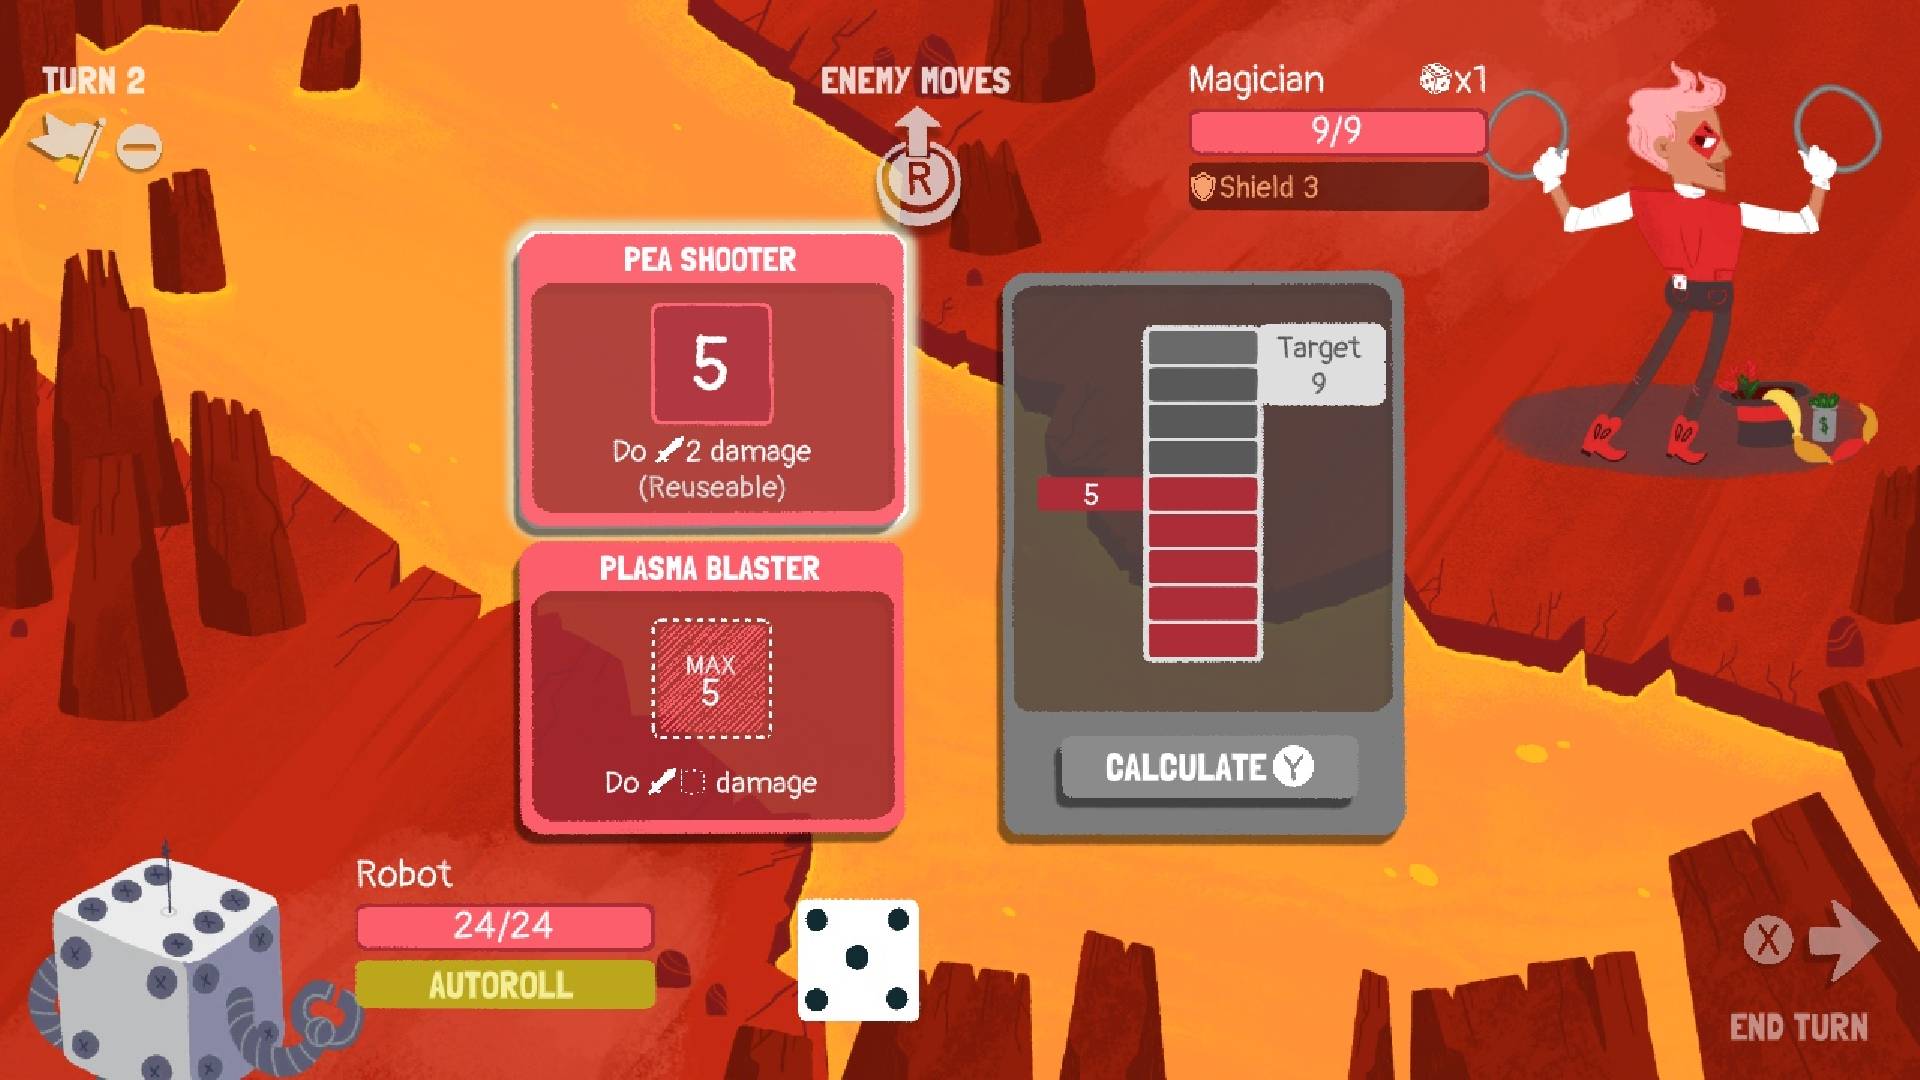 A screen shows a character that looks like a dice preparing to attack an enemy 